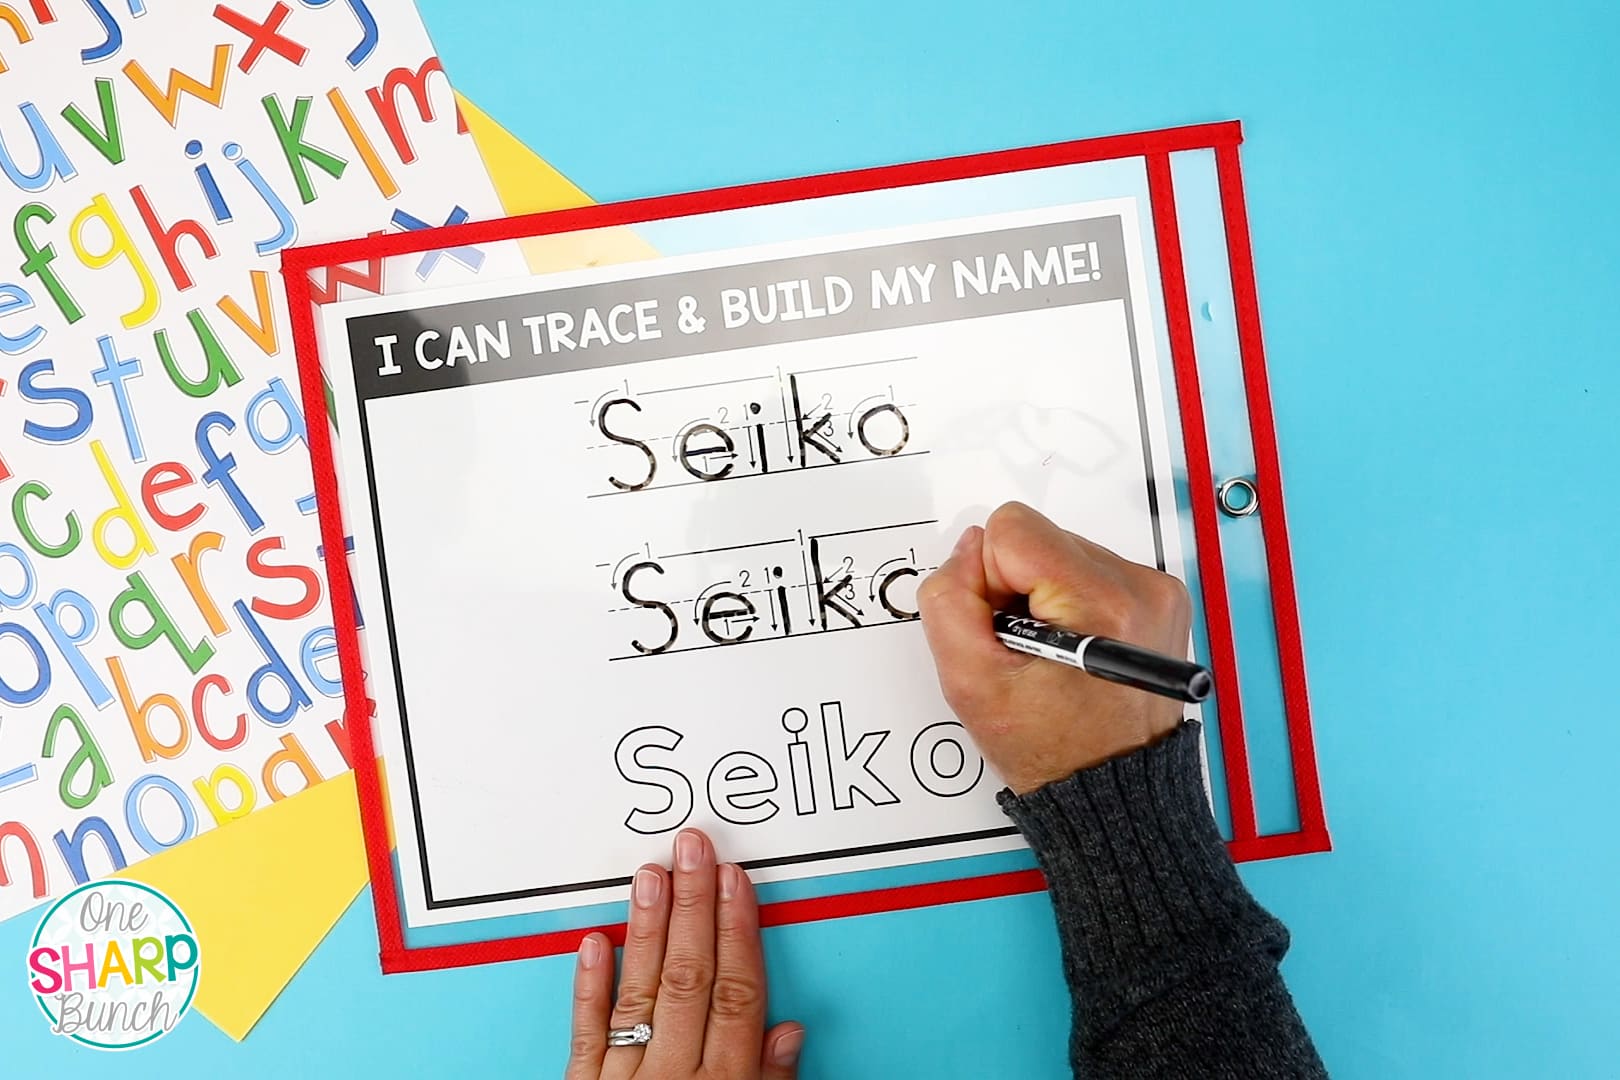 Looking for some fun and engaging name writing activities for preschool and kindergarten? These back to school name writing practice mats and name building activities are perfect for helping students learn how to write their name. Early elementary students get to practice tracing their name and building their name with magnetic letters. These editable name mats work well for centers, morning work or early finisher activities. Use these name practice mats with your favorite name books for kids!